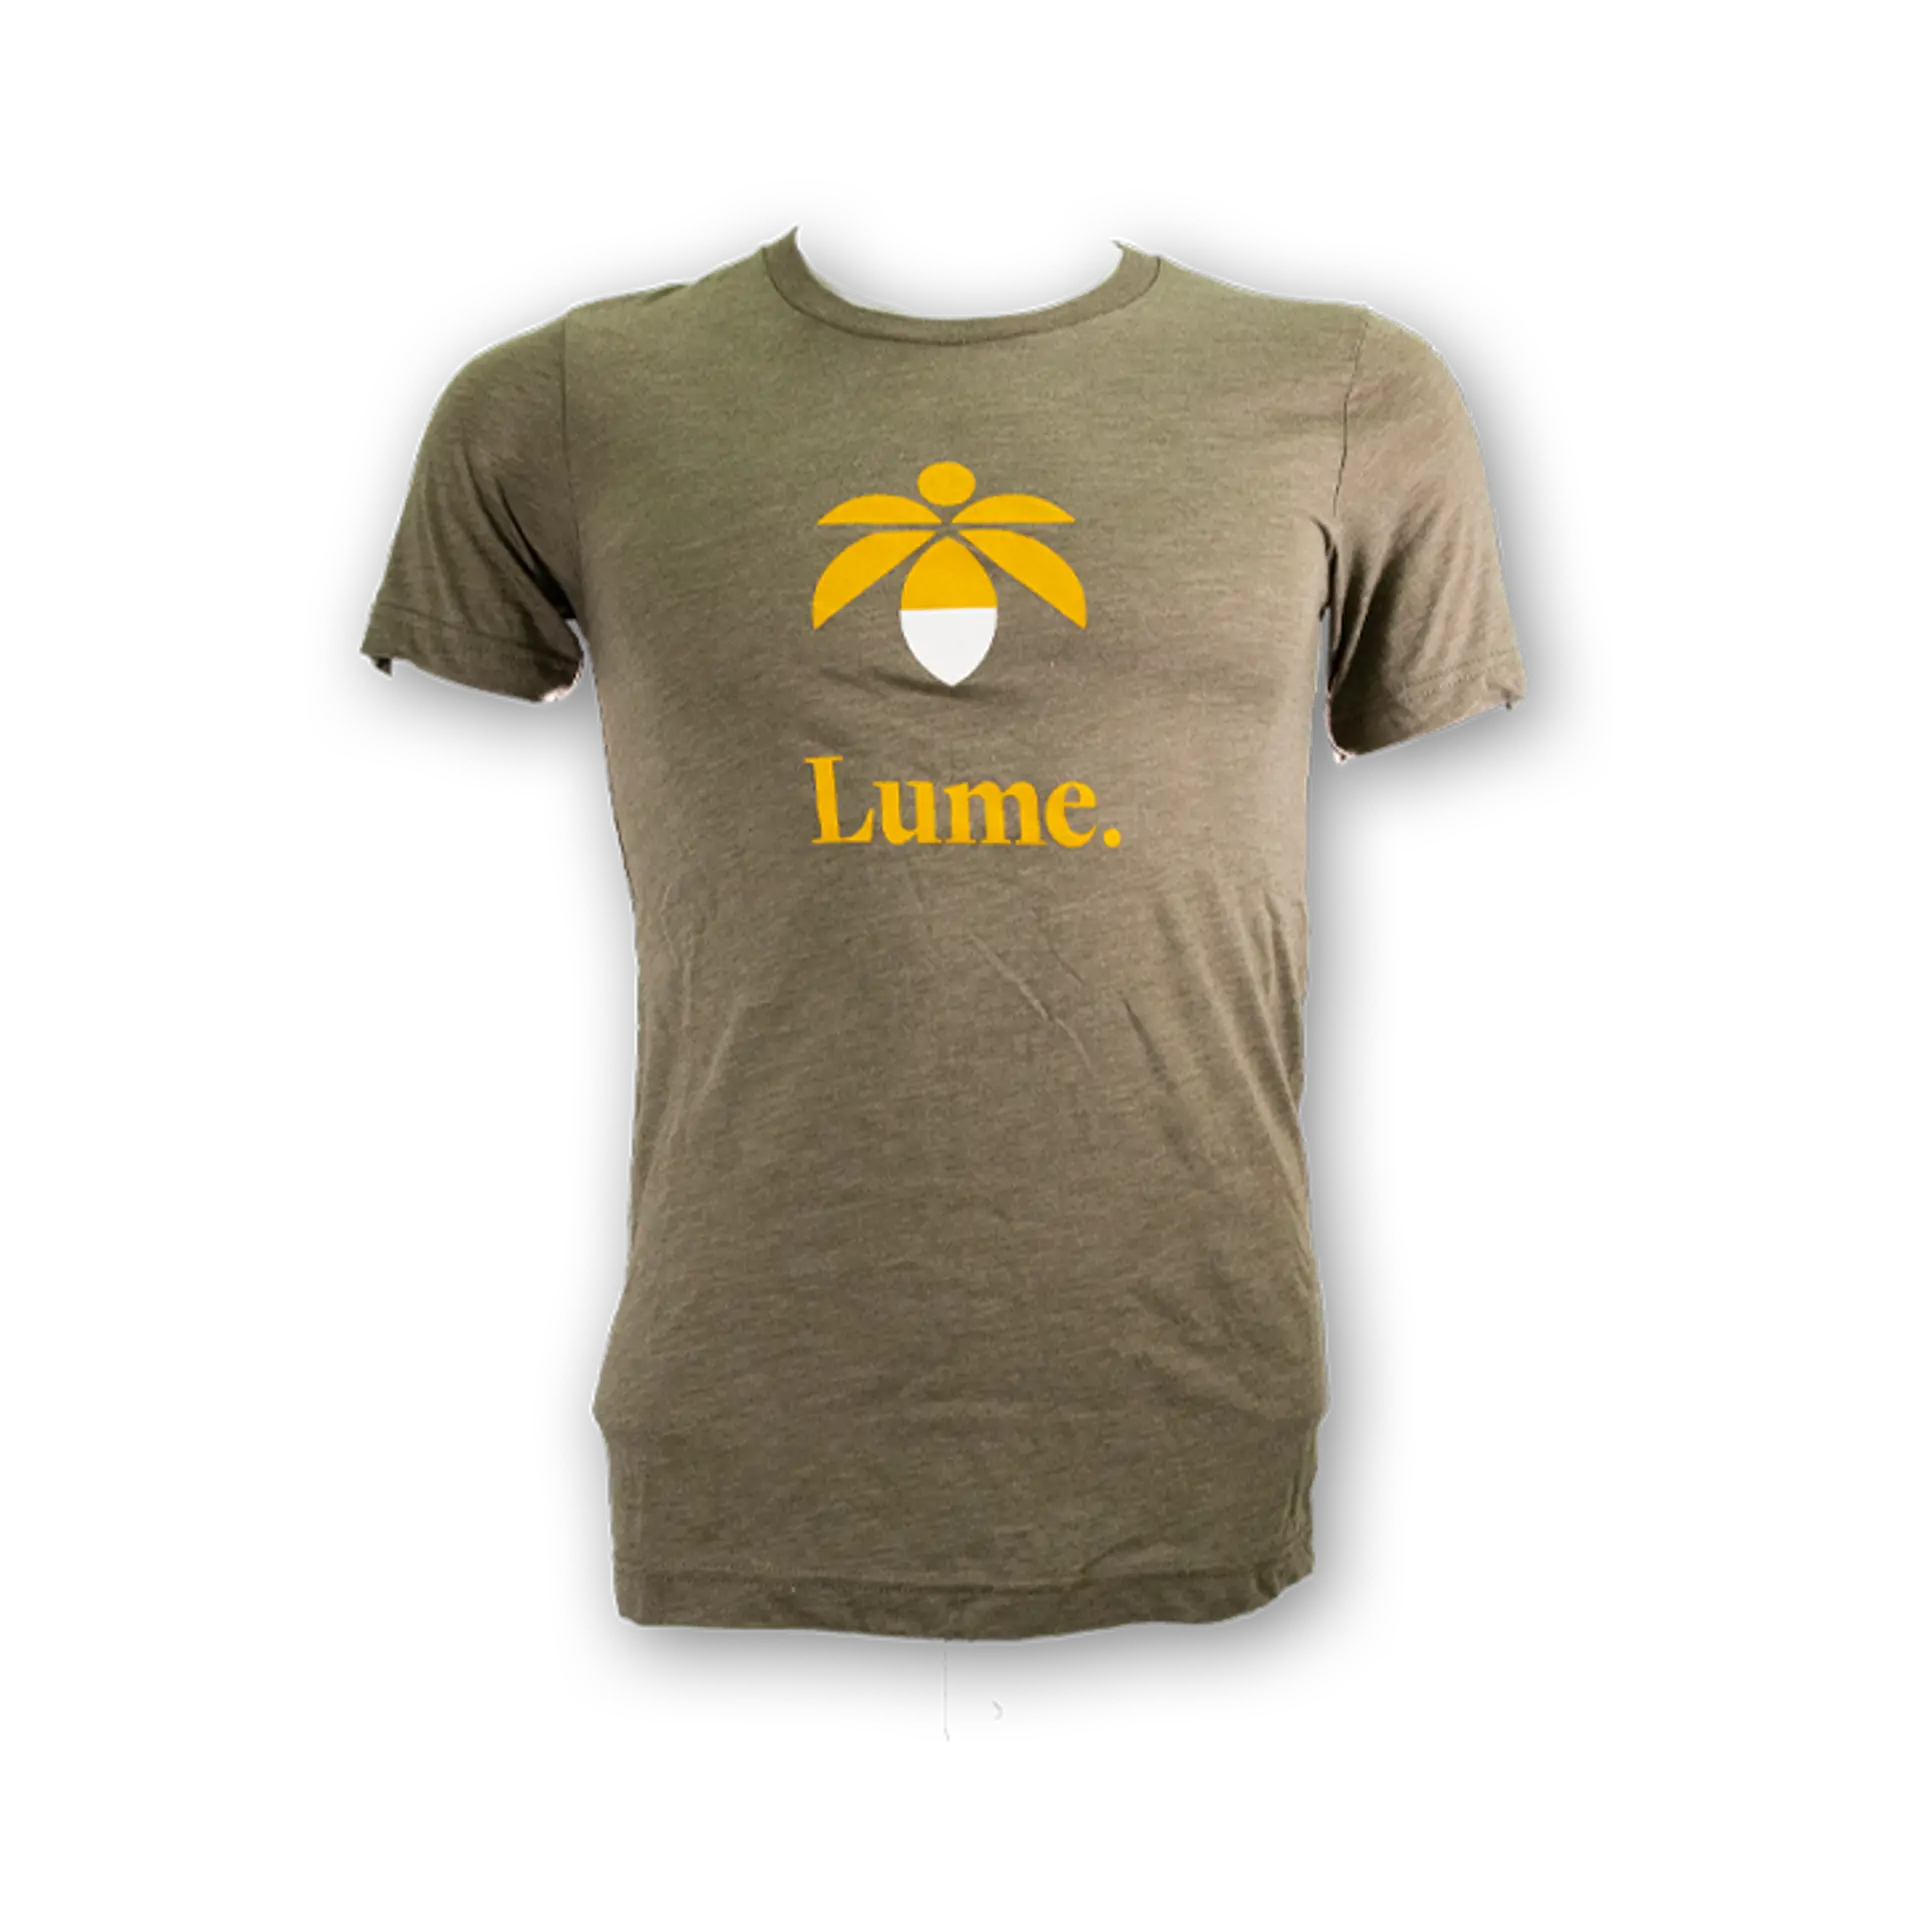 Firefly Tshirt - Olive Green (s)